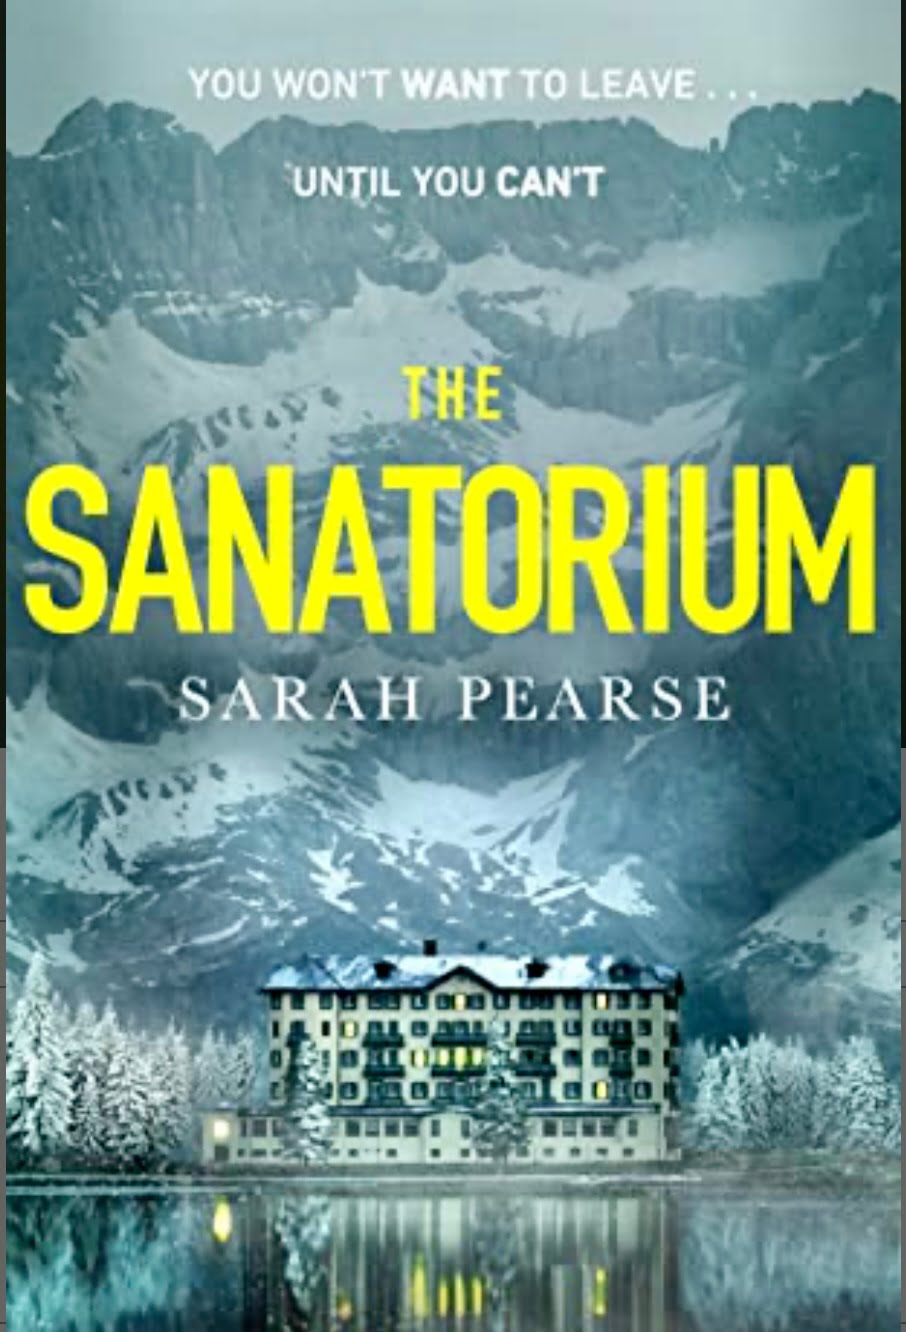 THE SANATORIUM BY SARAH PEARSE – BOOK REVIEW